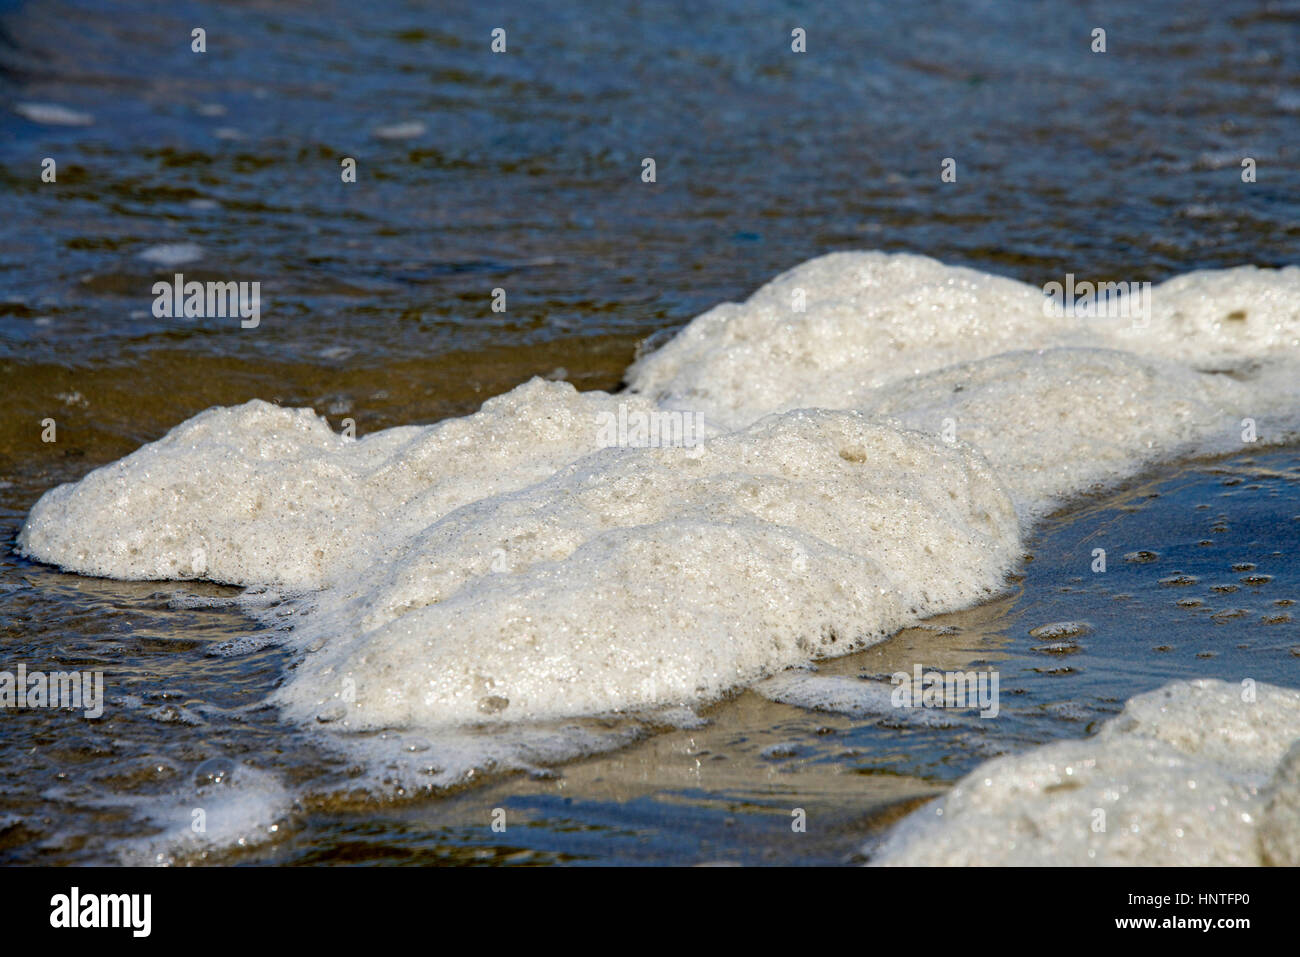 Sea foam is created by the agitation of seawater when it contains higher concentrations of dissolved organic matter including proteins and lipids from Stock Photo